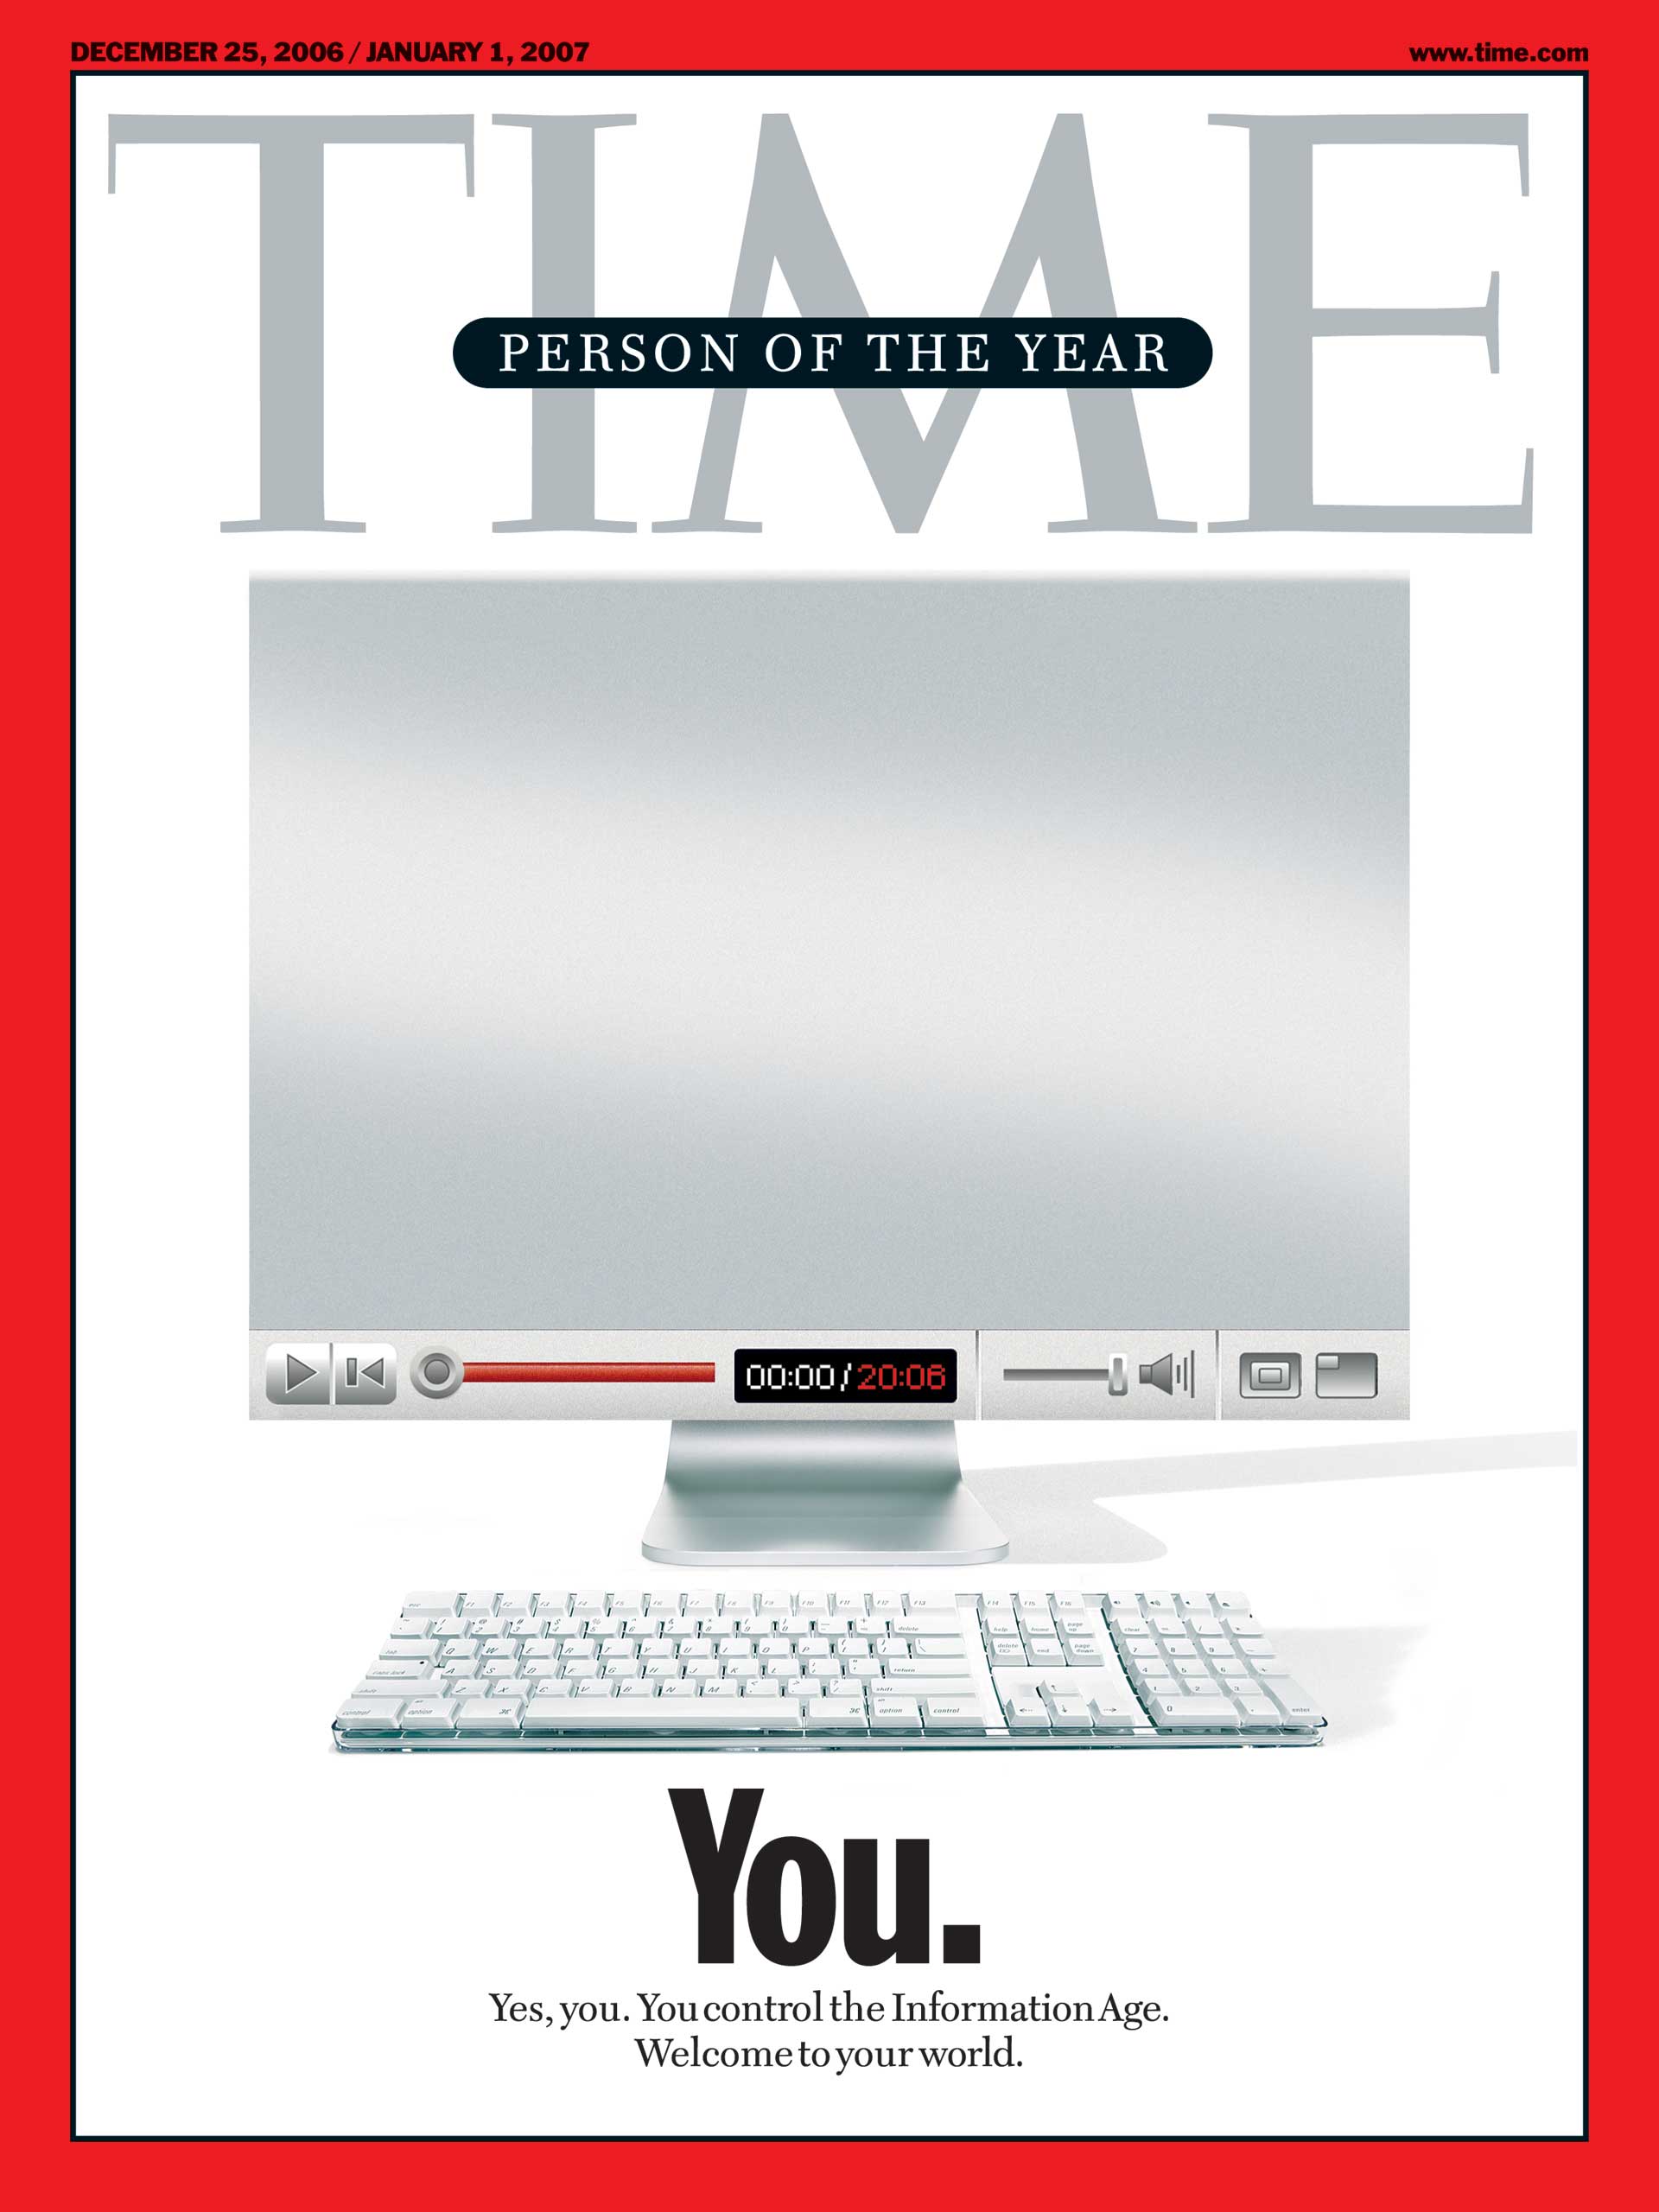 TIME's person of the year 2006: You